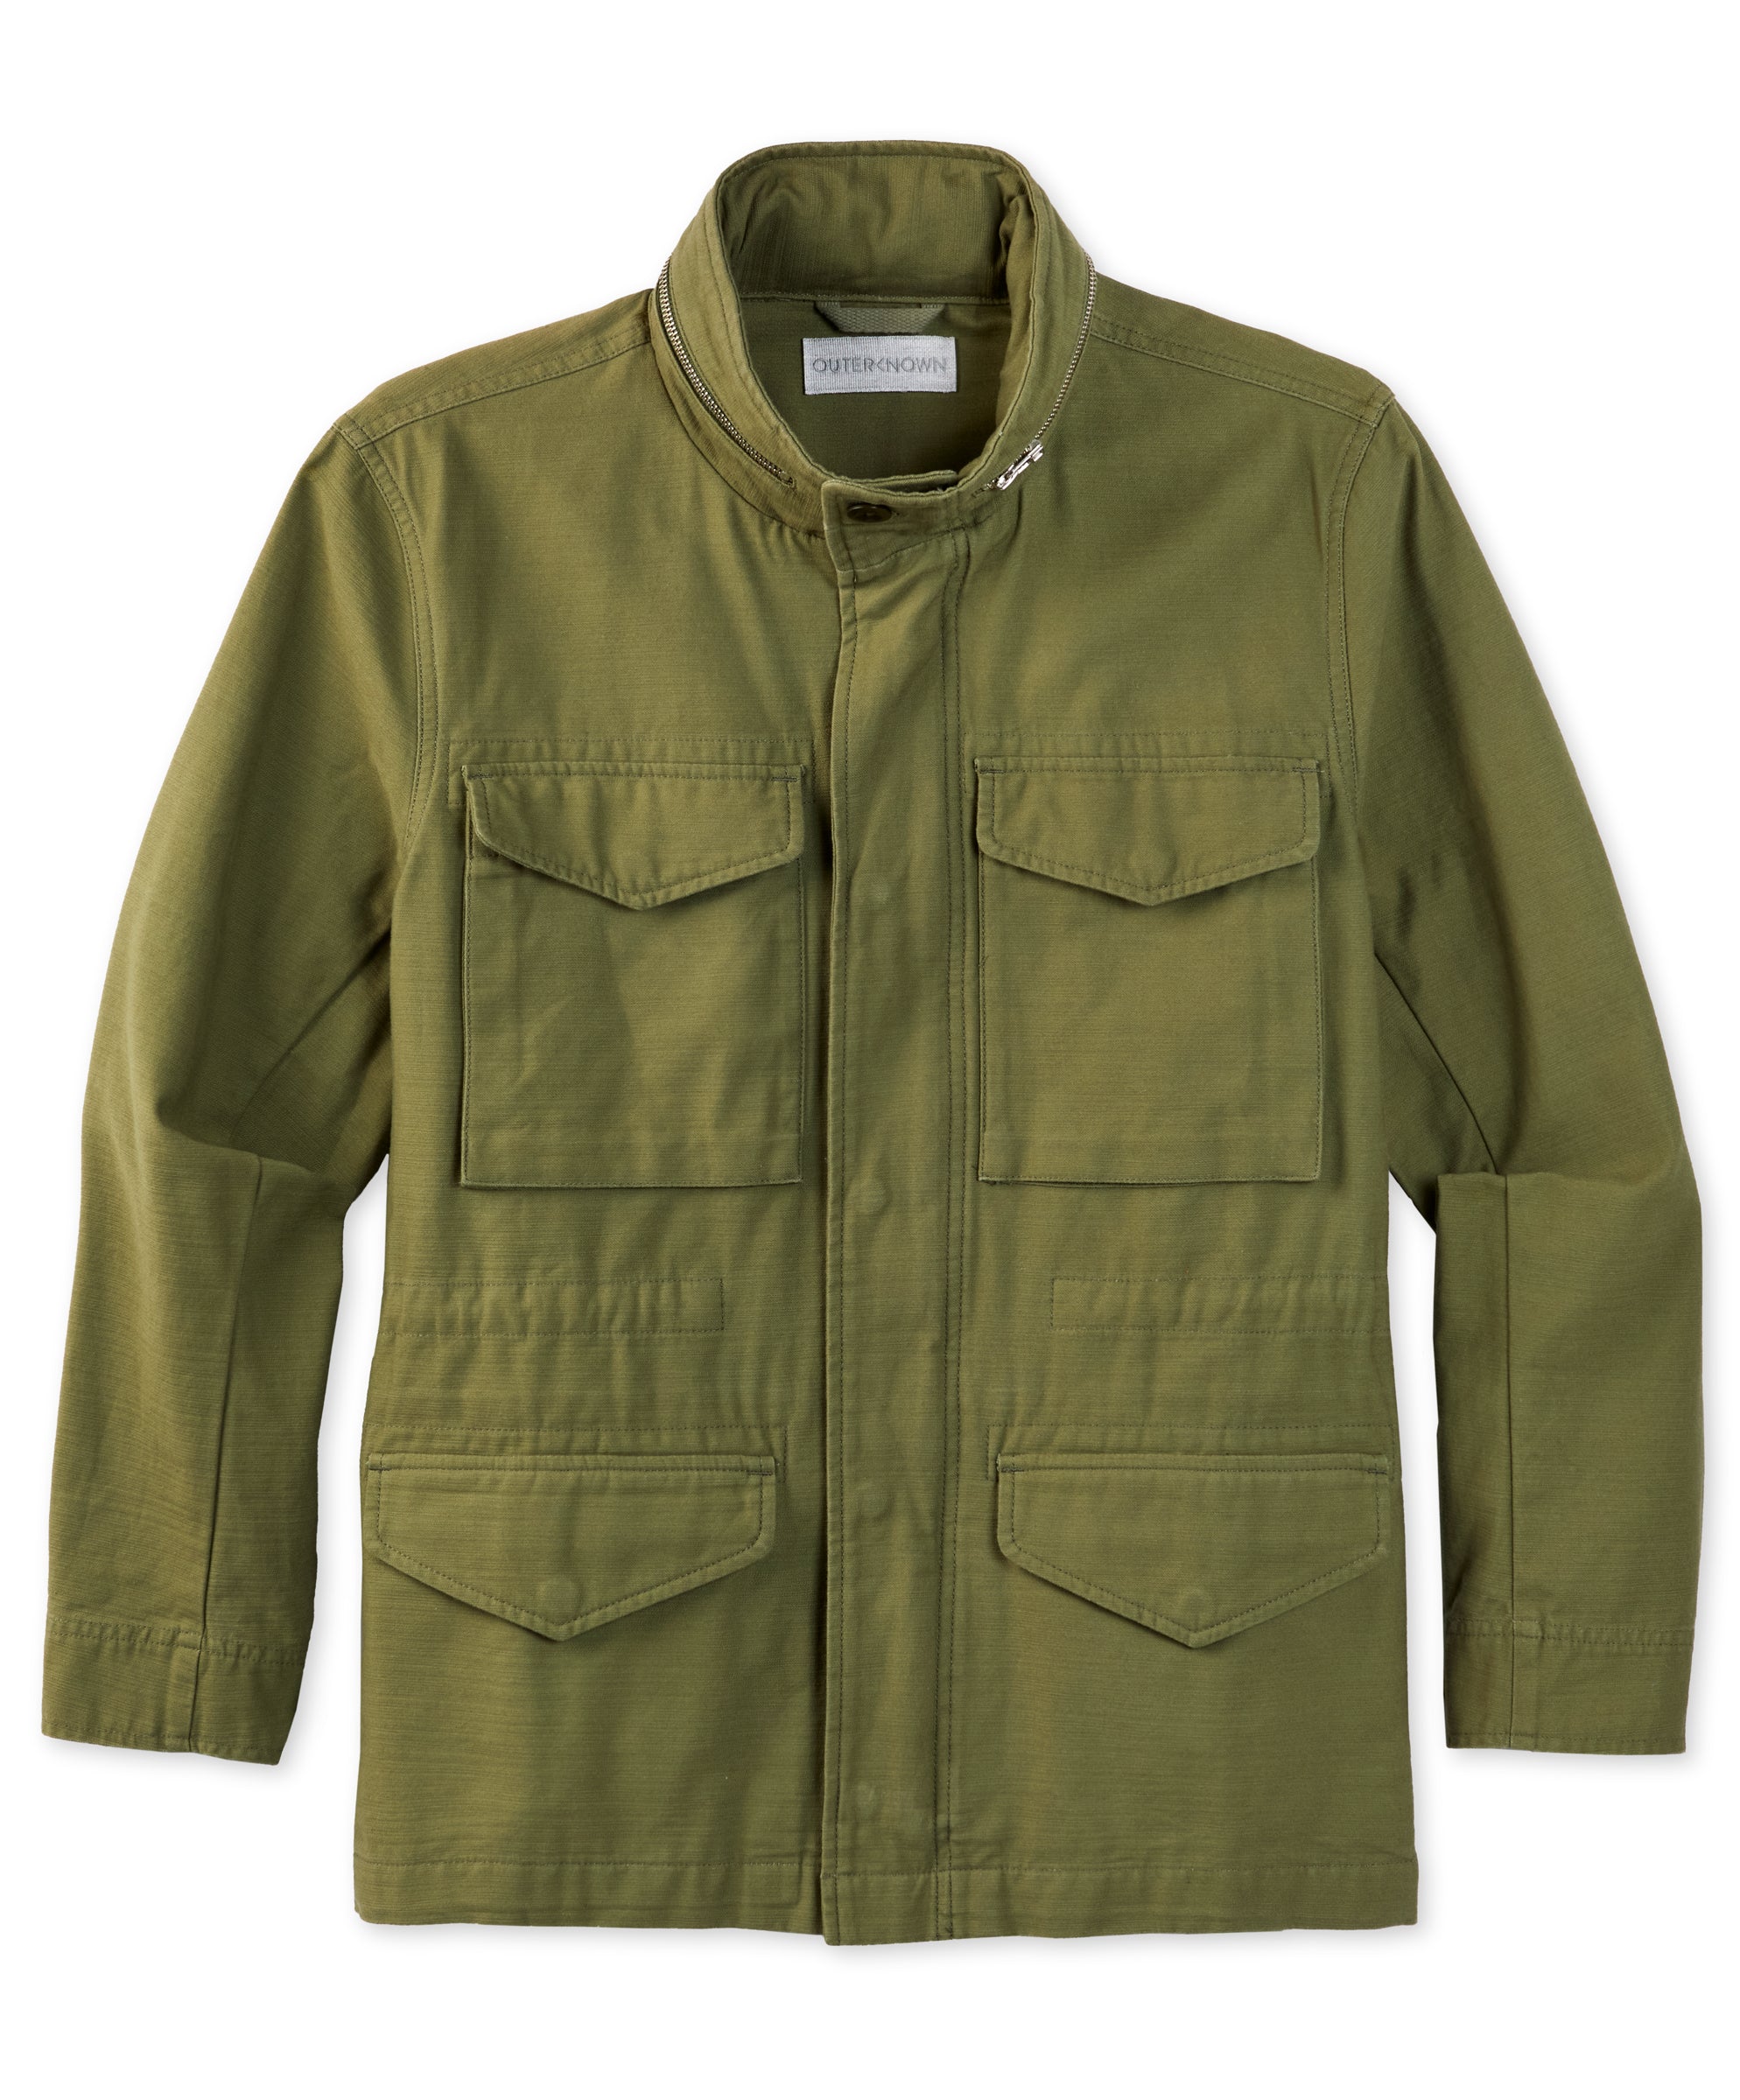 Voyager Jacket | Men's Outerwear | Outerknown